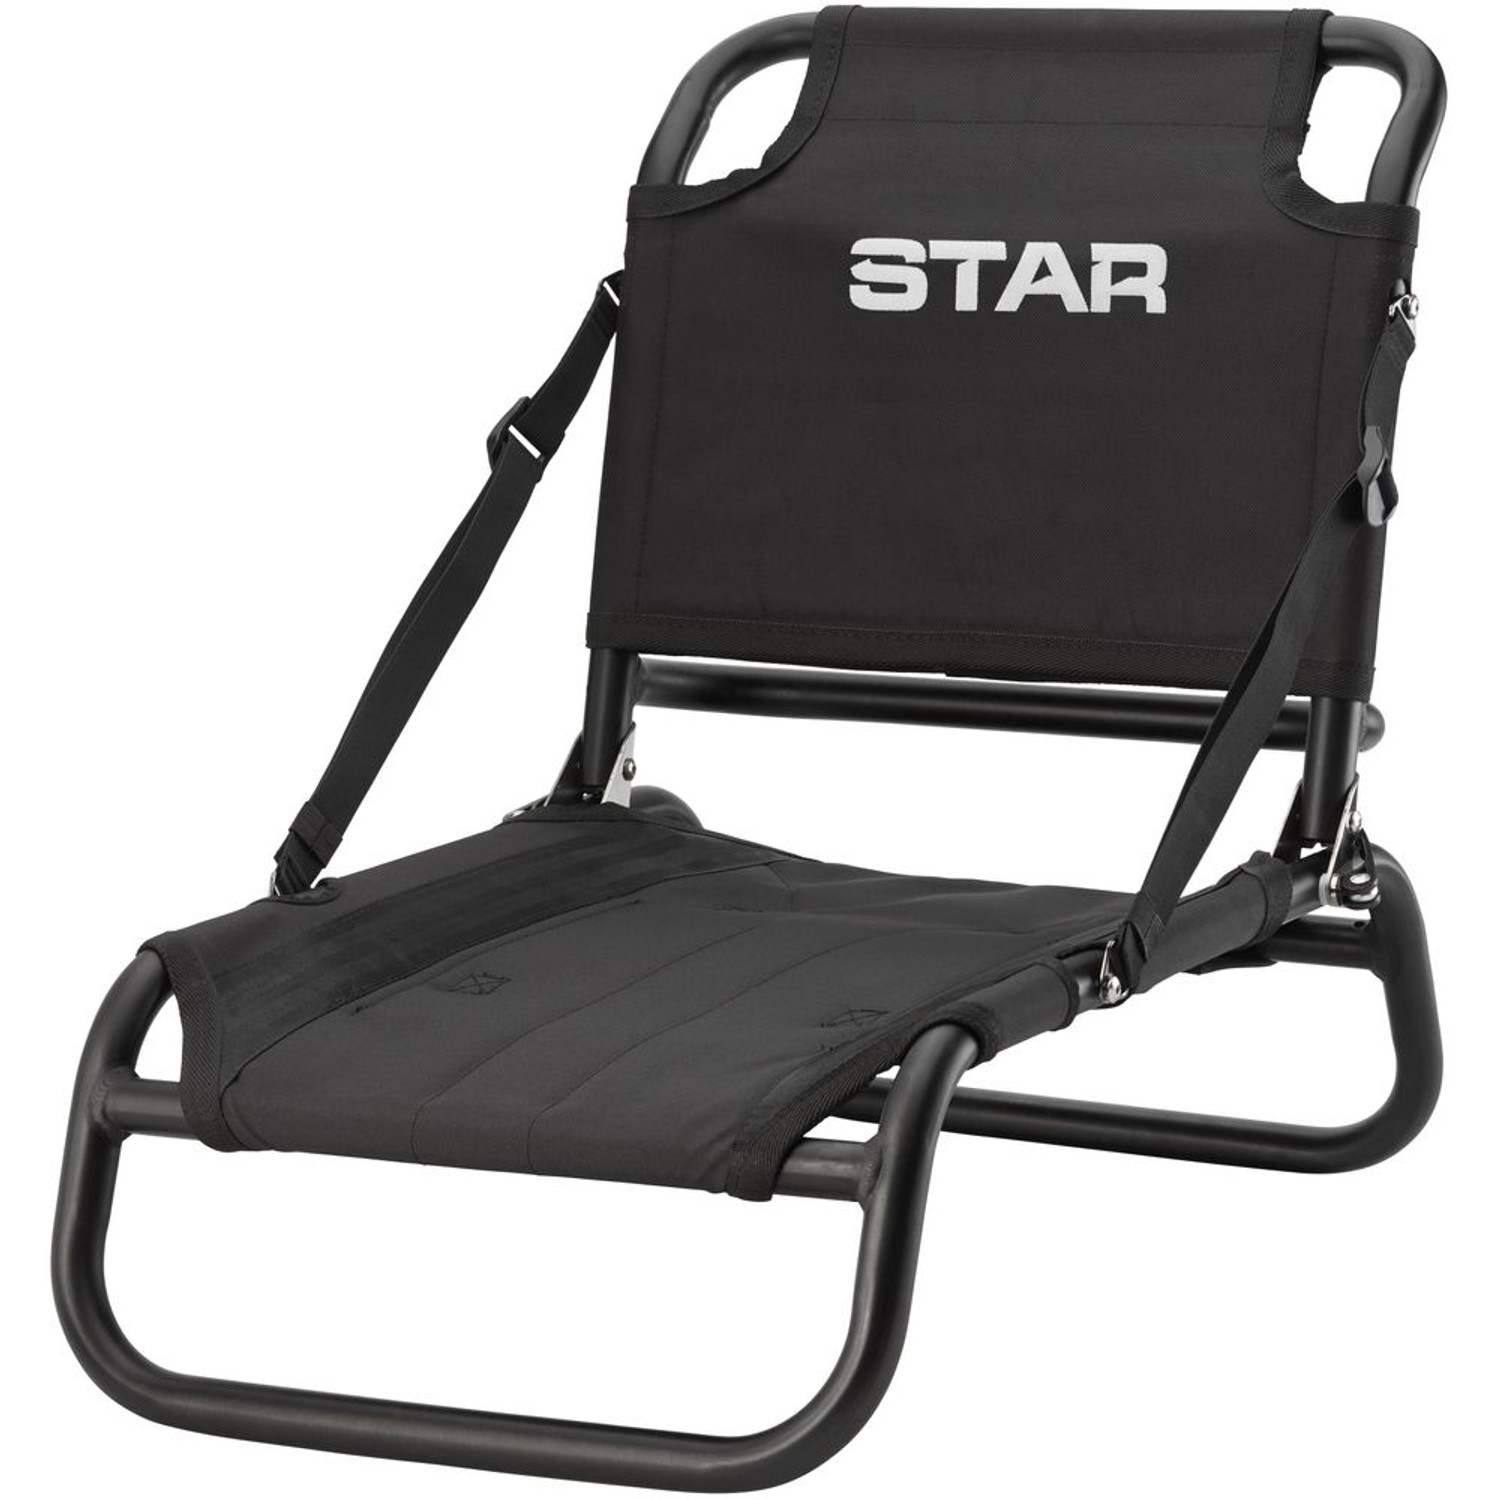 Fishing Seat for Inflatable Kayaks by Star